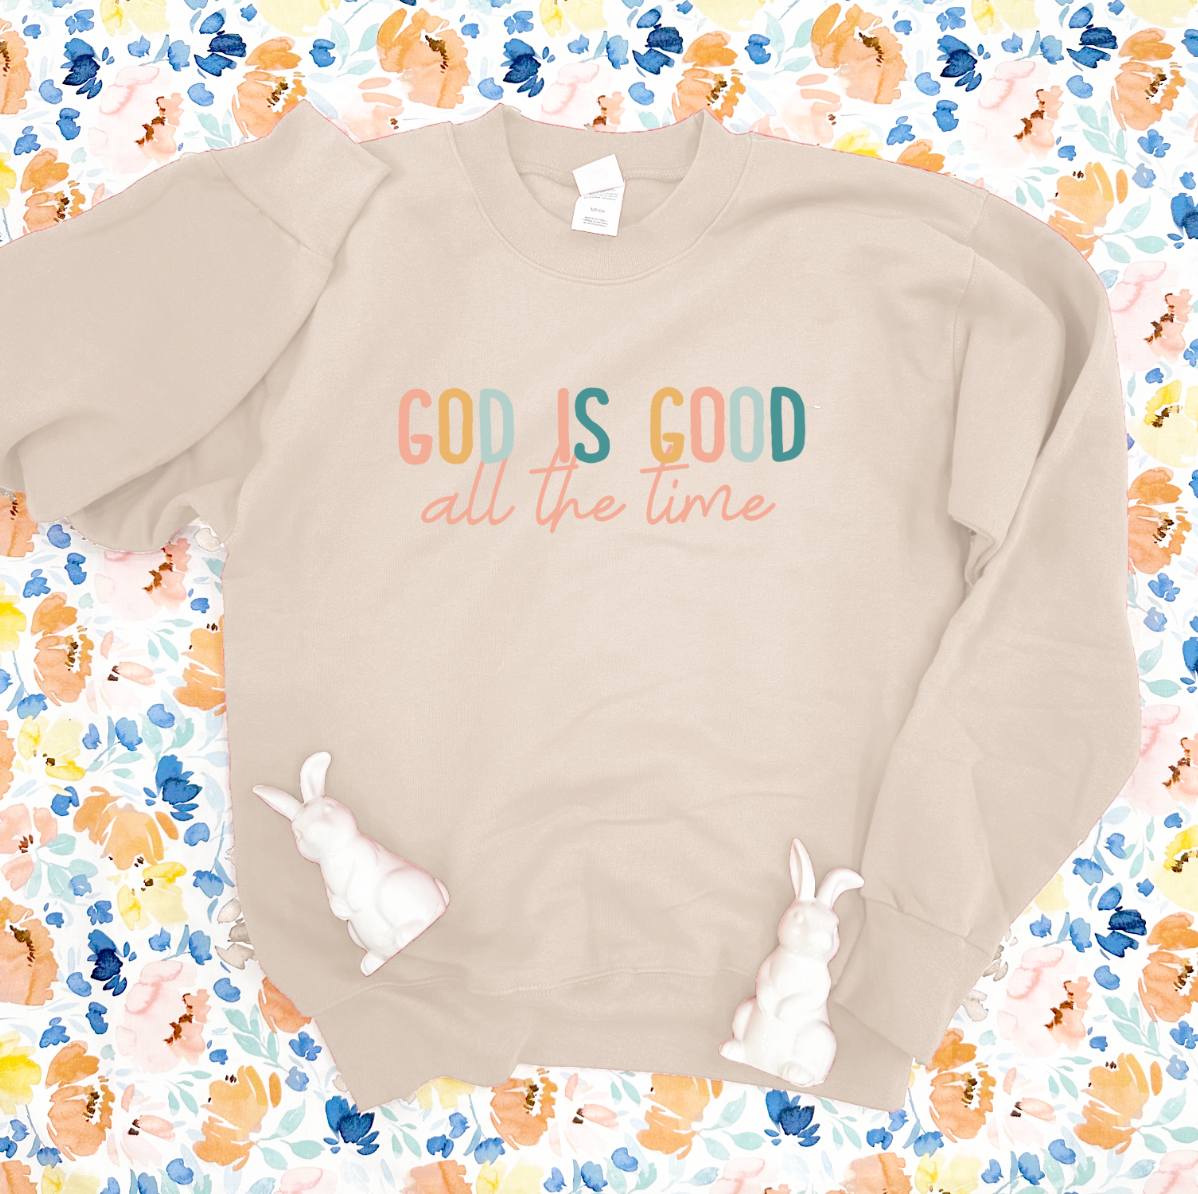 EASTER 2023: God Is Good All The Time (SWEATSHIRT)